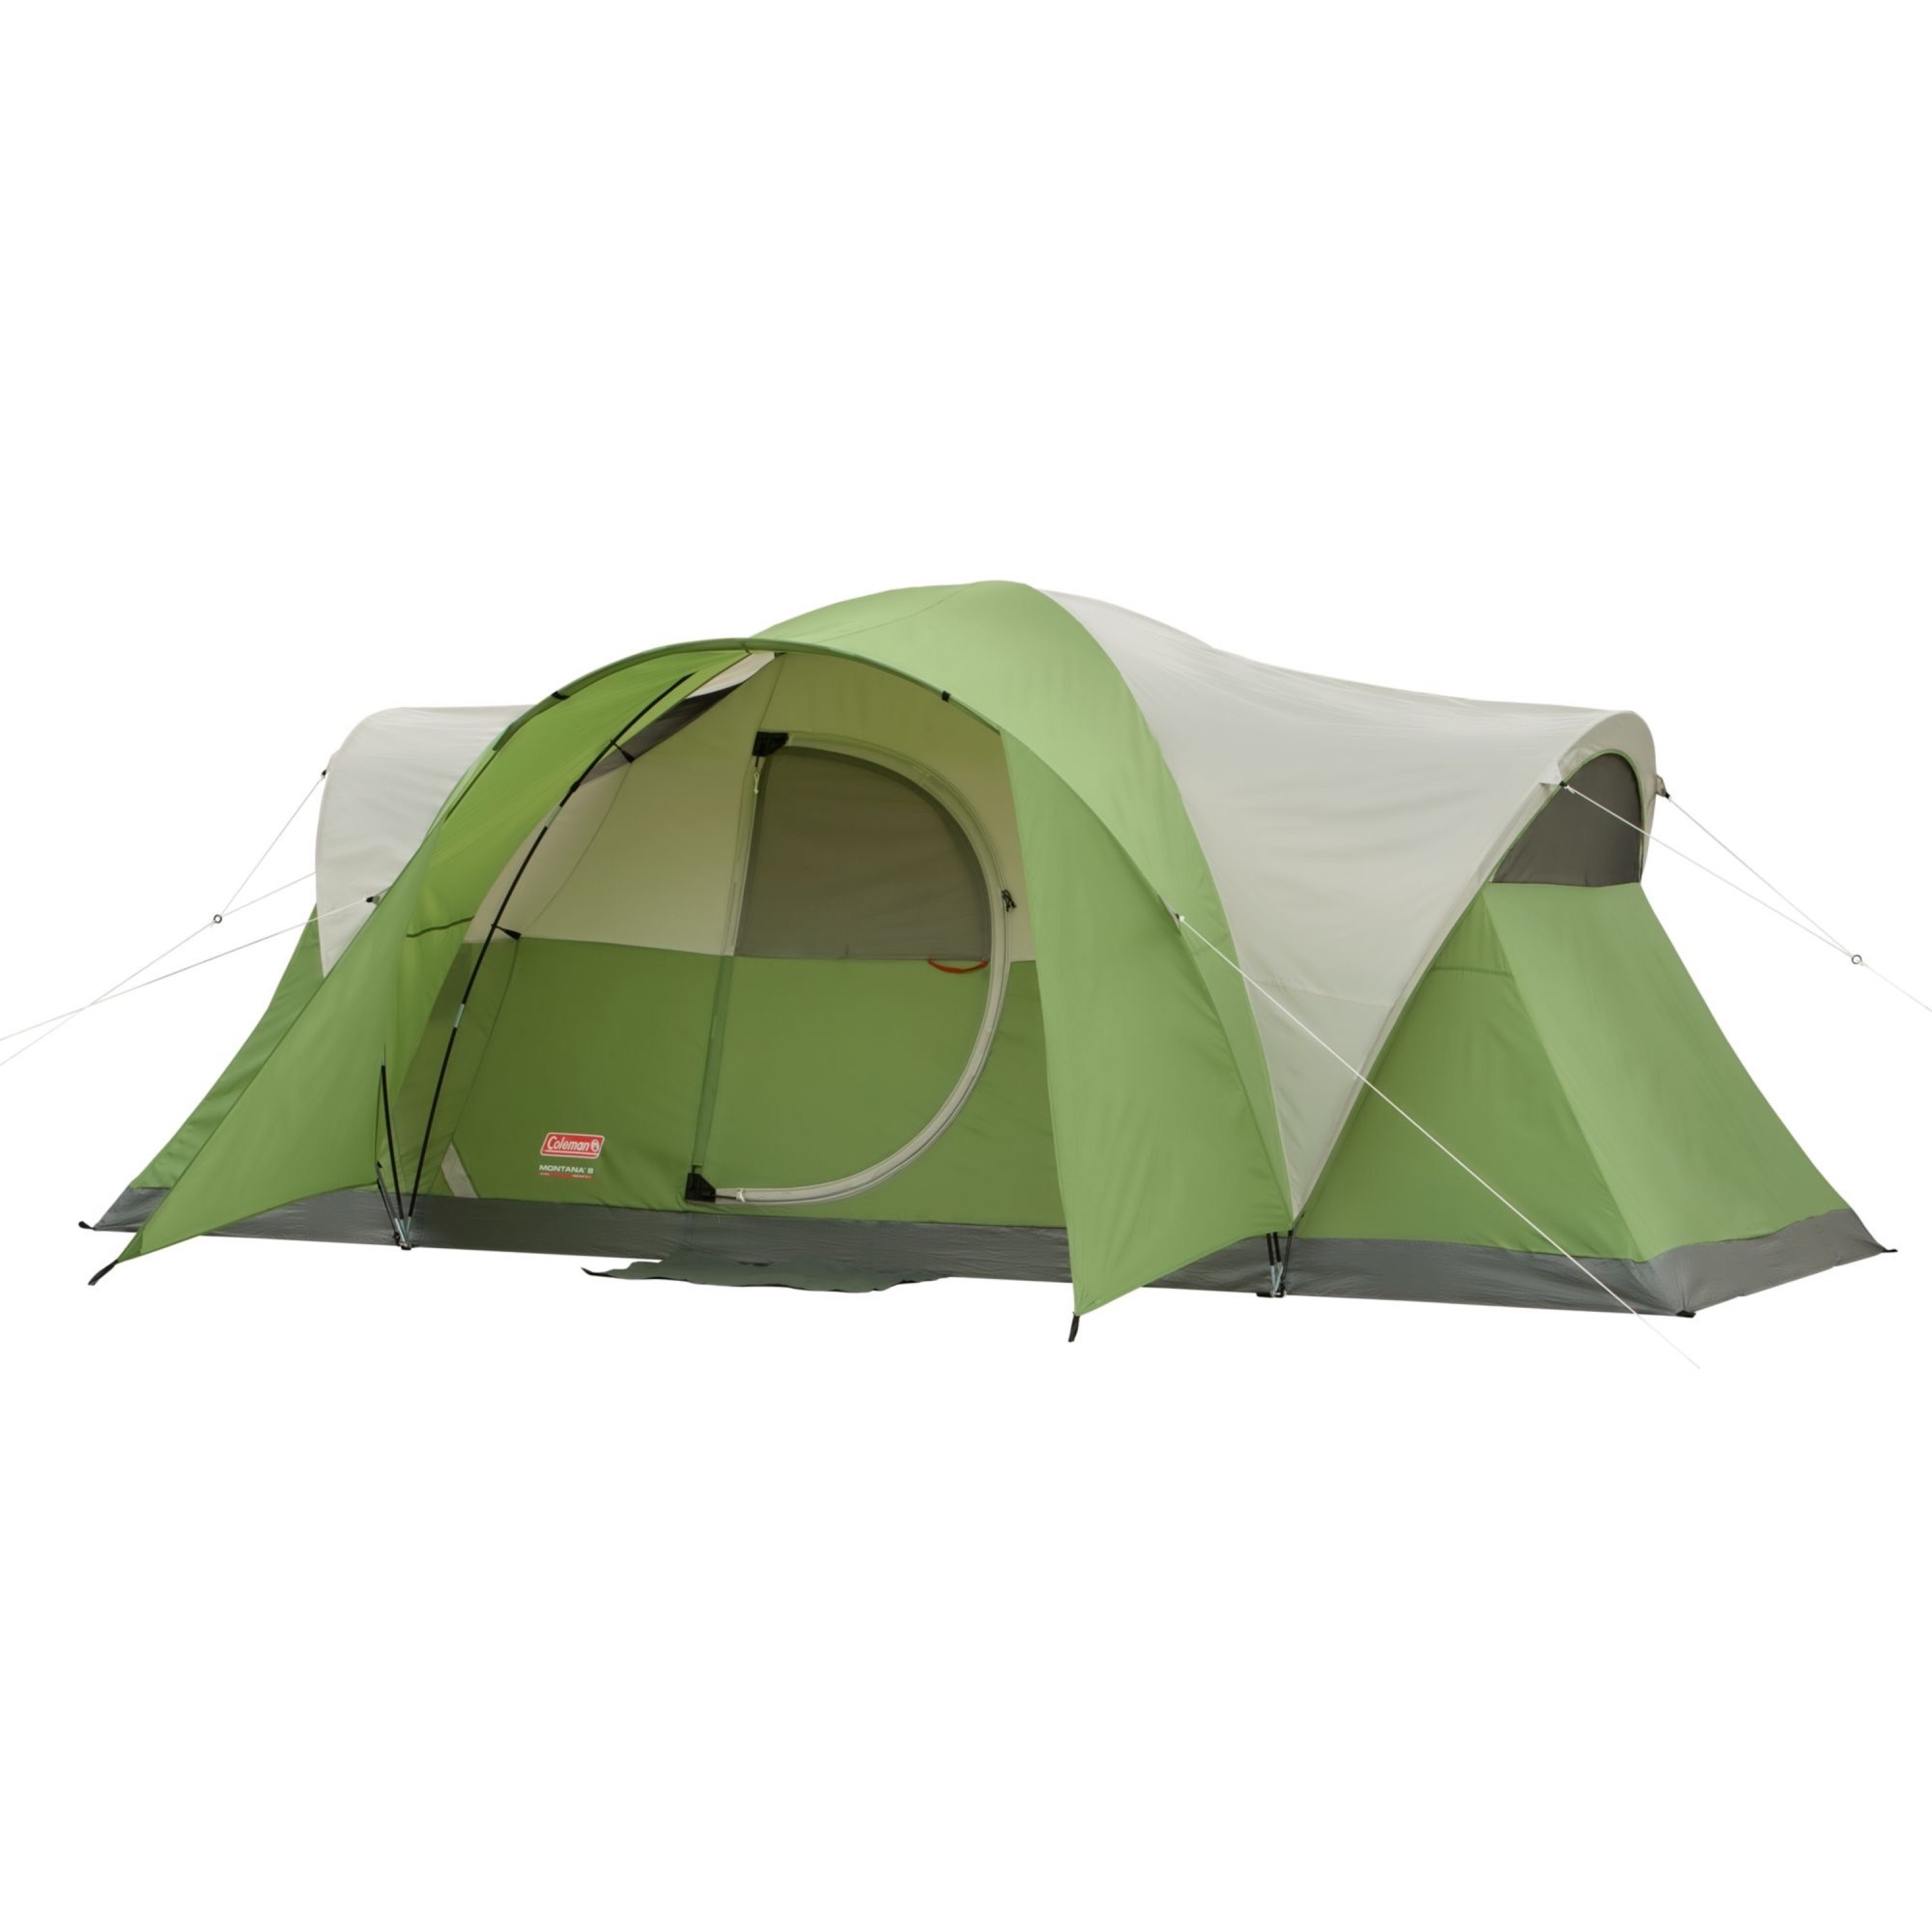 Coleman Montana 8-Person Dome Tent, 1 Room, Green - image 1 of 8